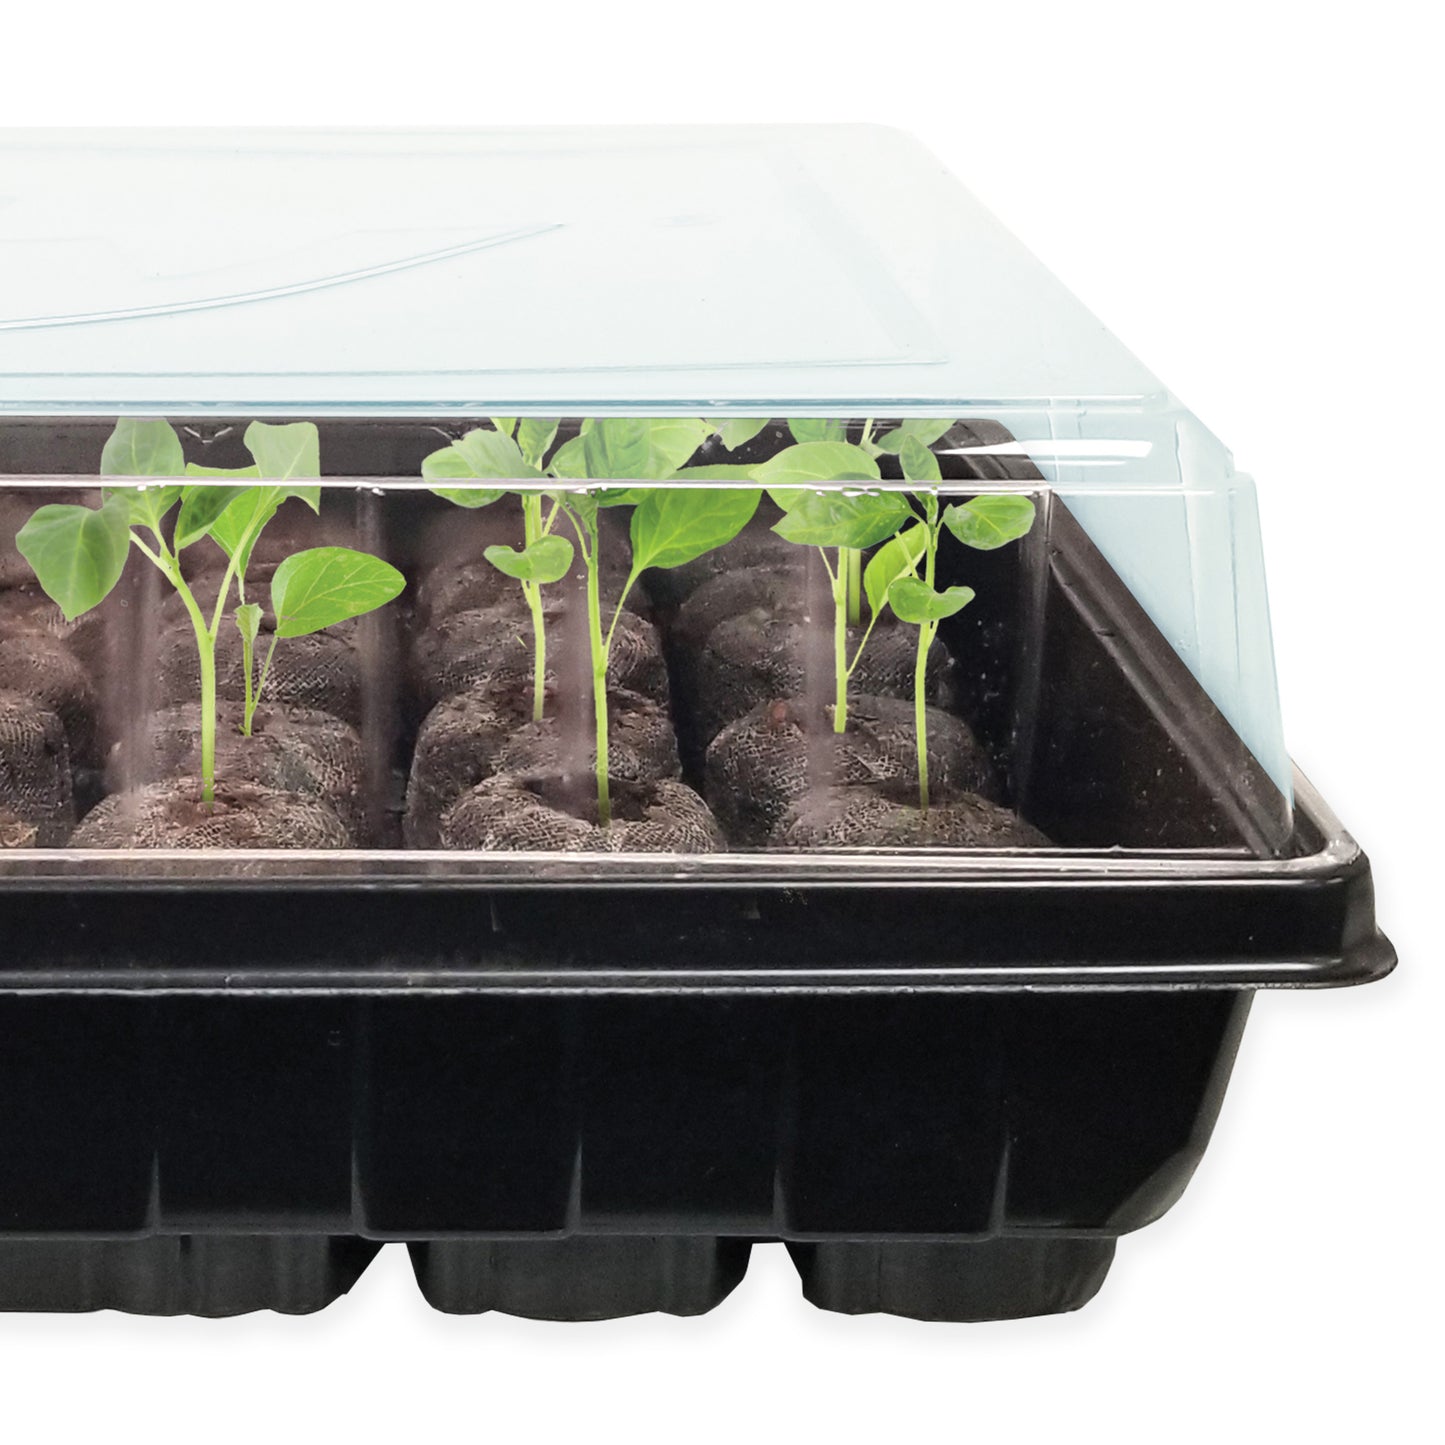 A depiction of healthy young seedlings sitting inside of a Jiffy greenhouse, best practice is to prop open side of greenhouse once all seeds have sprouted.